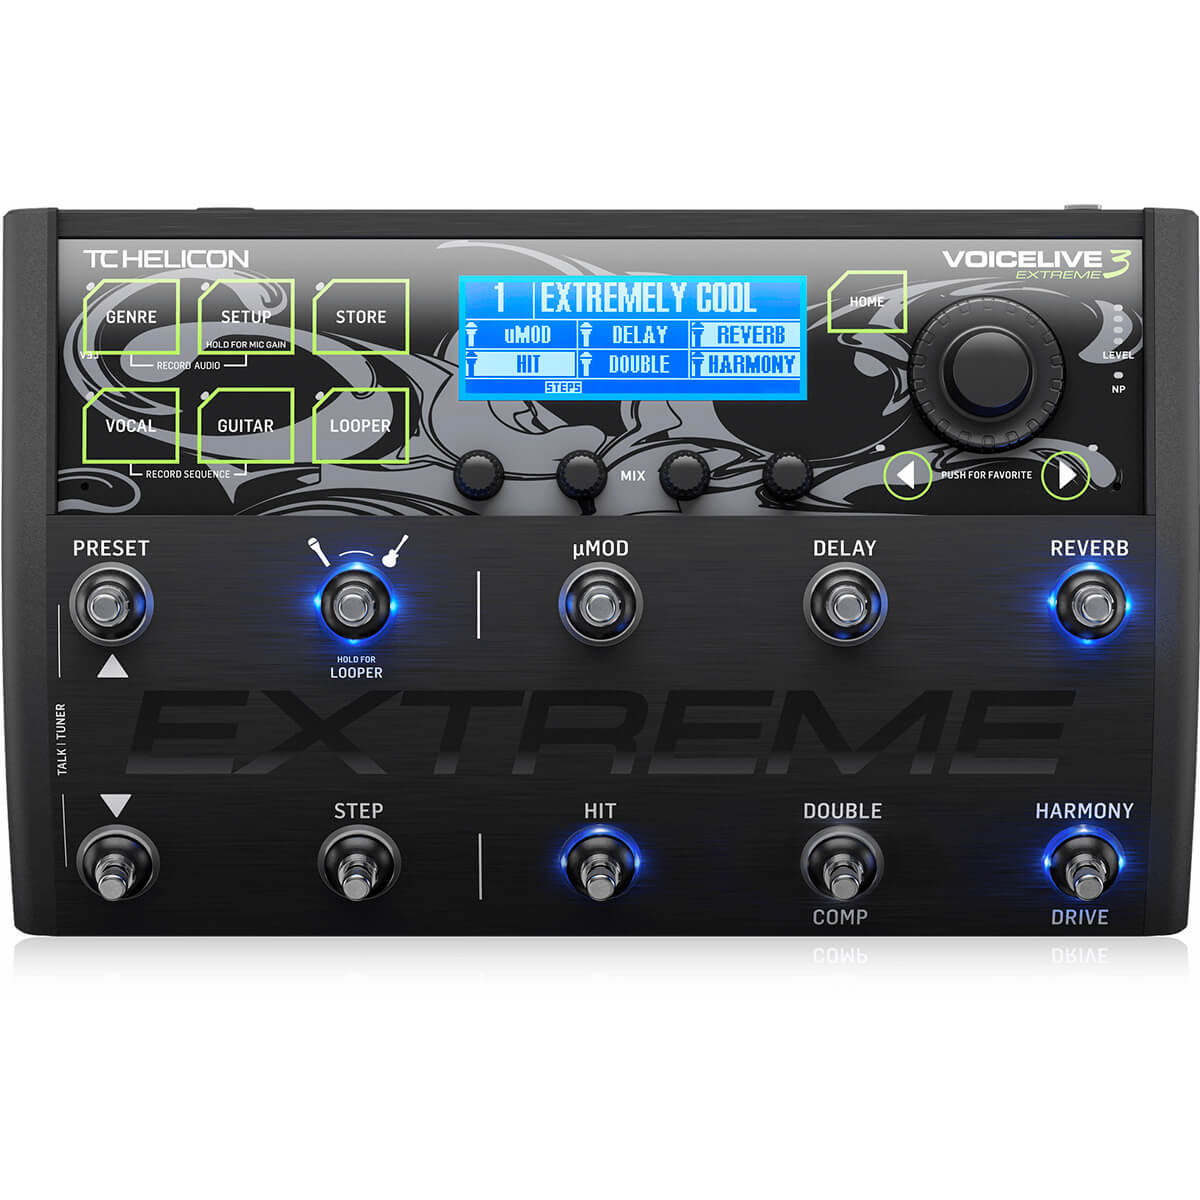 TC-Helicon VoiceLive 3 Guitar/Vocal Effects Processor 996362005